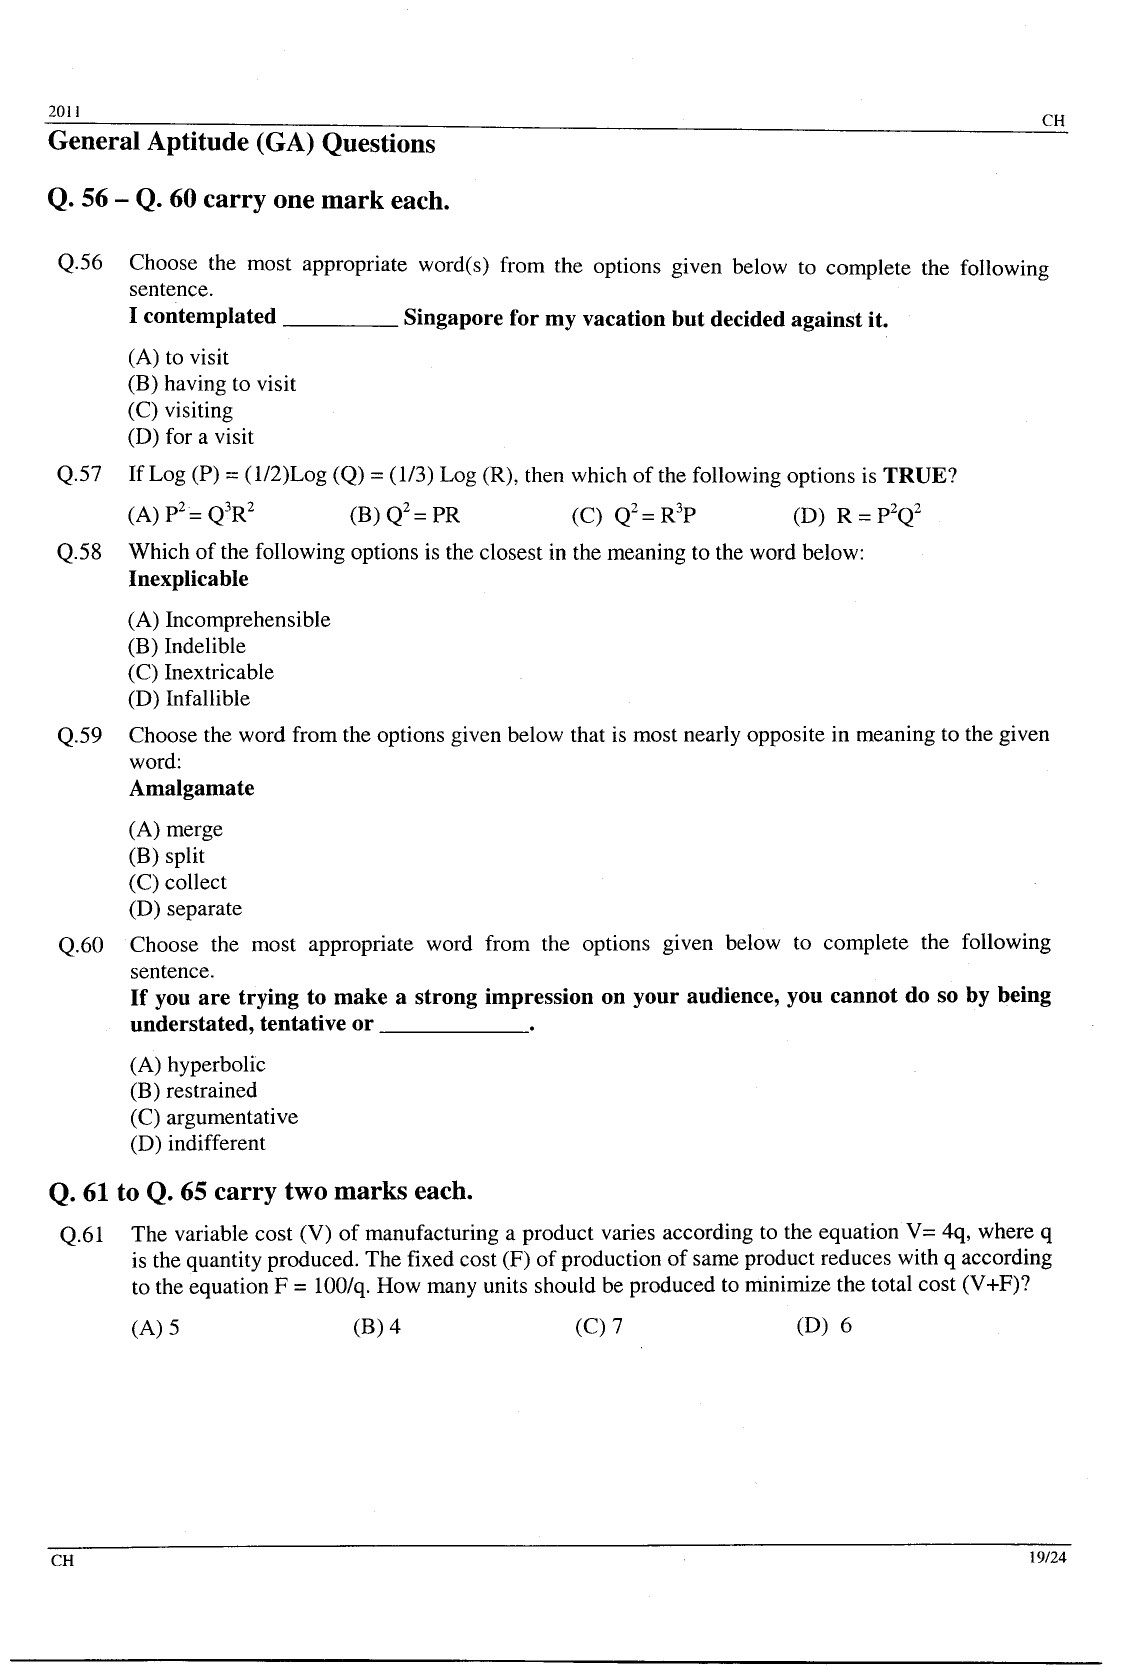 GATE Exam Question Paper 2011 Chemical Engineering 19